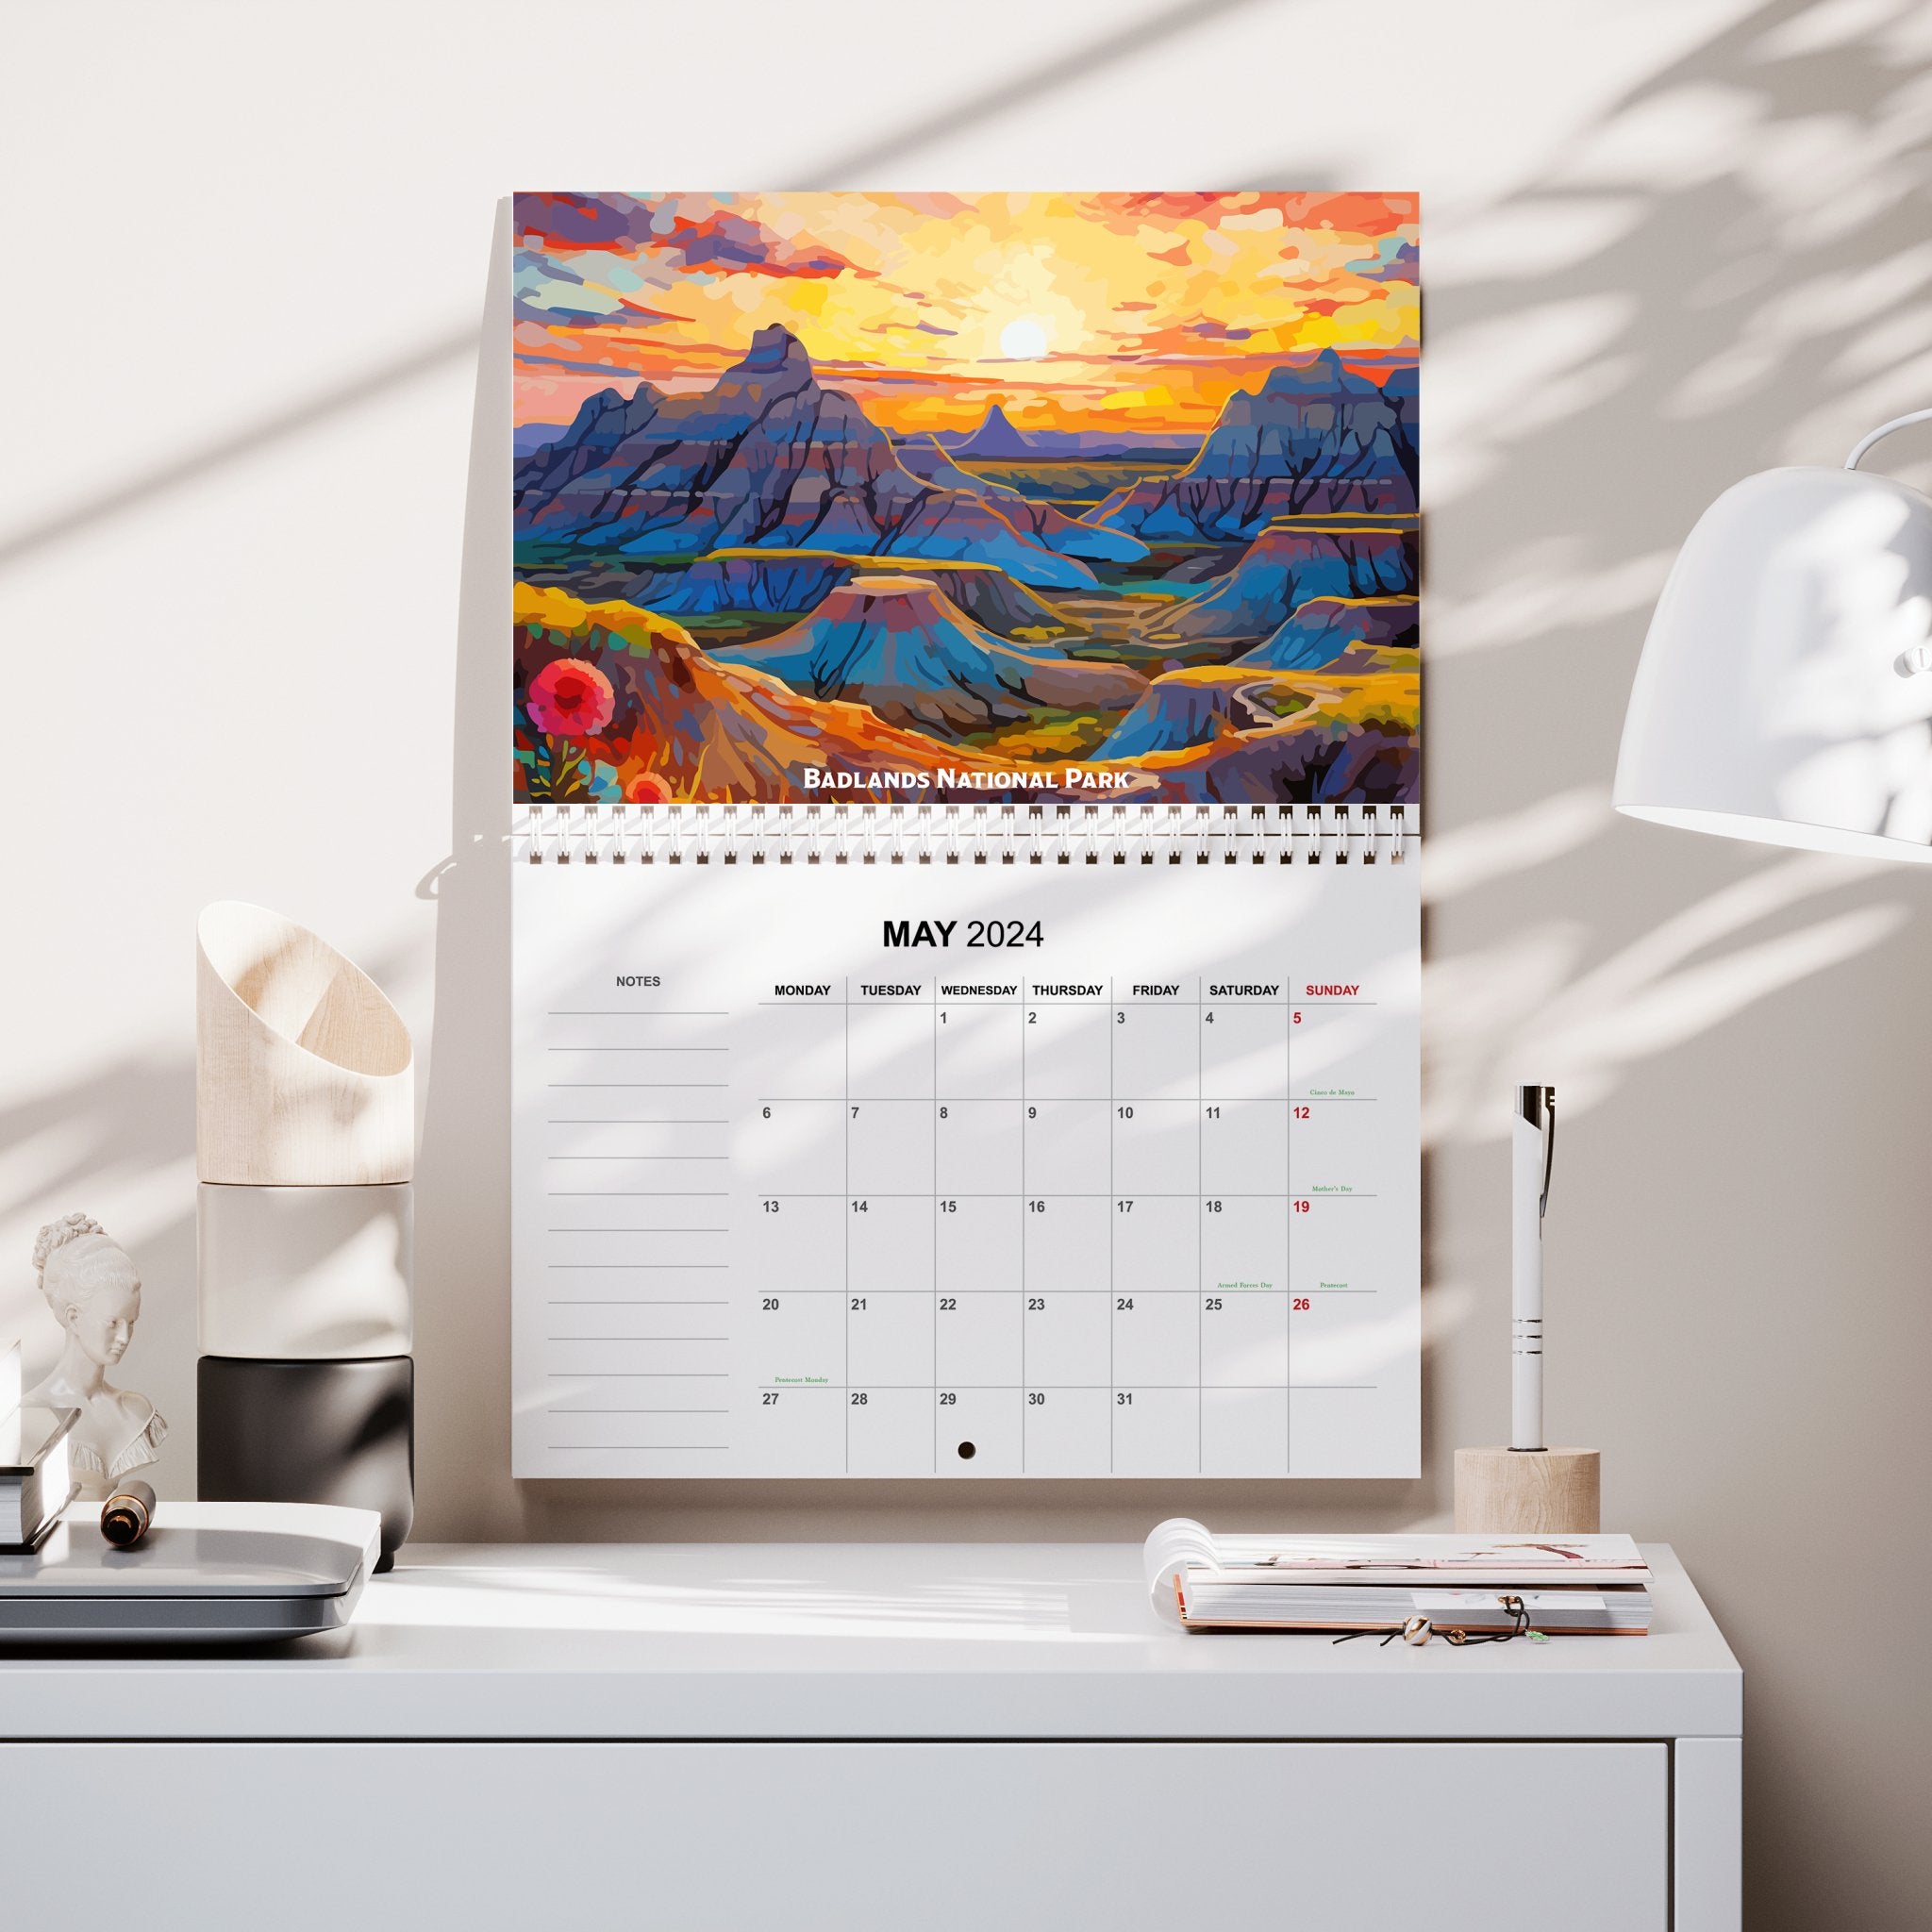 2024 Pop Art National Parks Calendar: Your Year, Colorfully Unscripted - My Nature Book Adventures